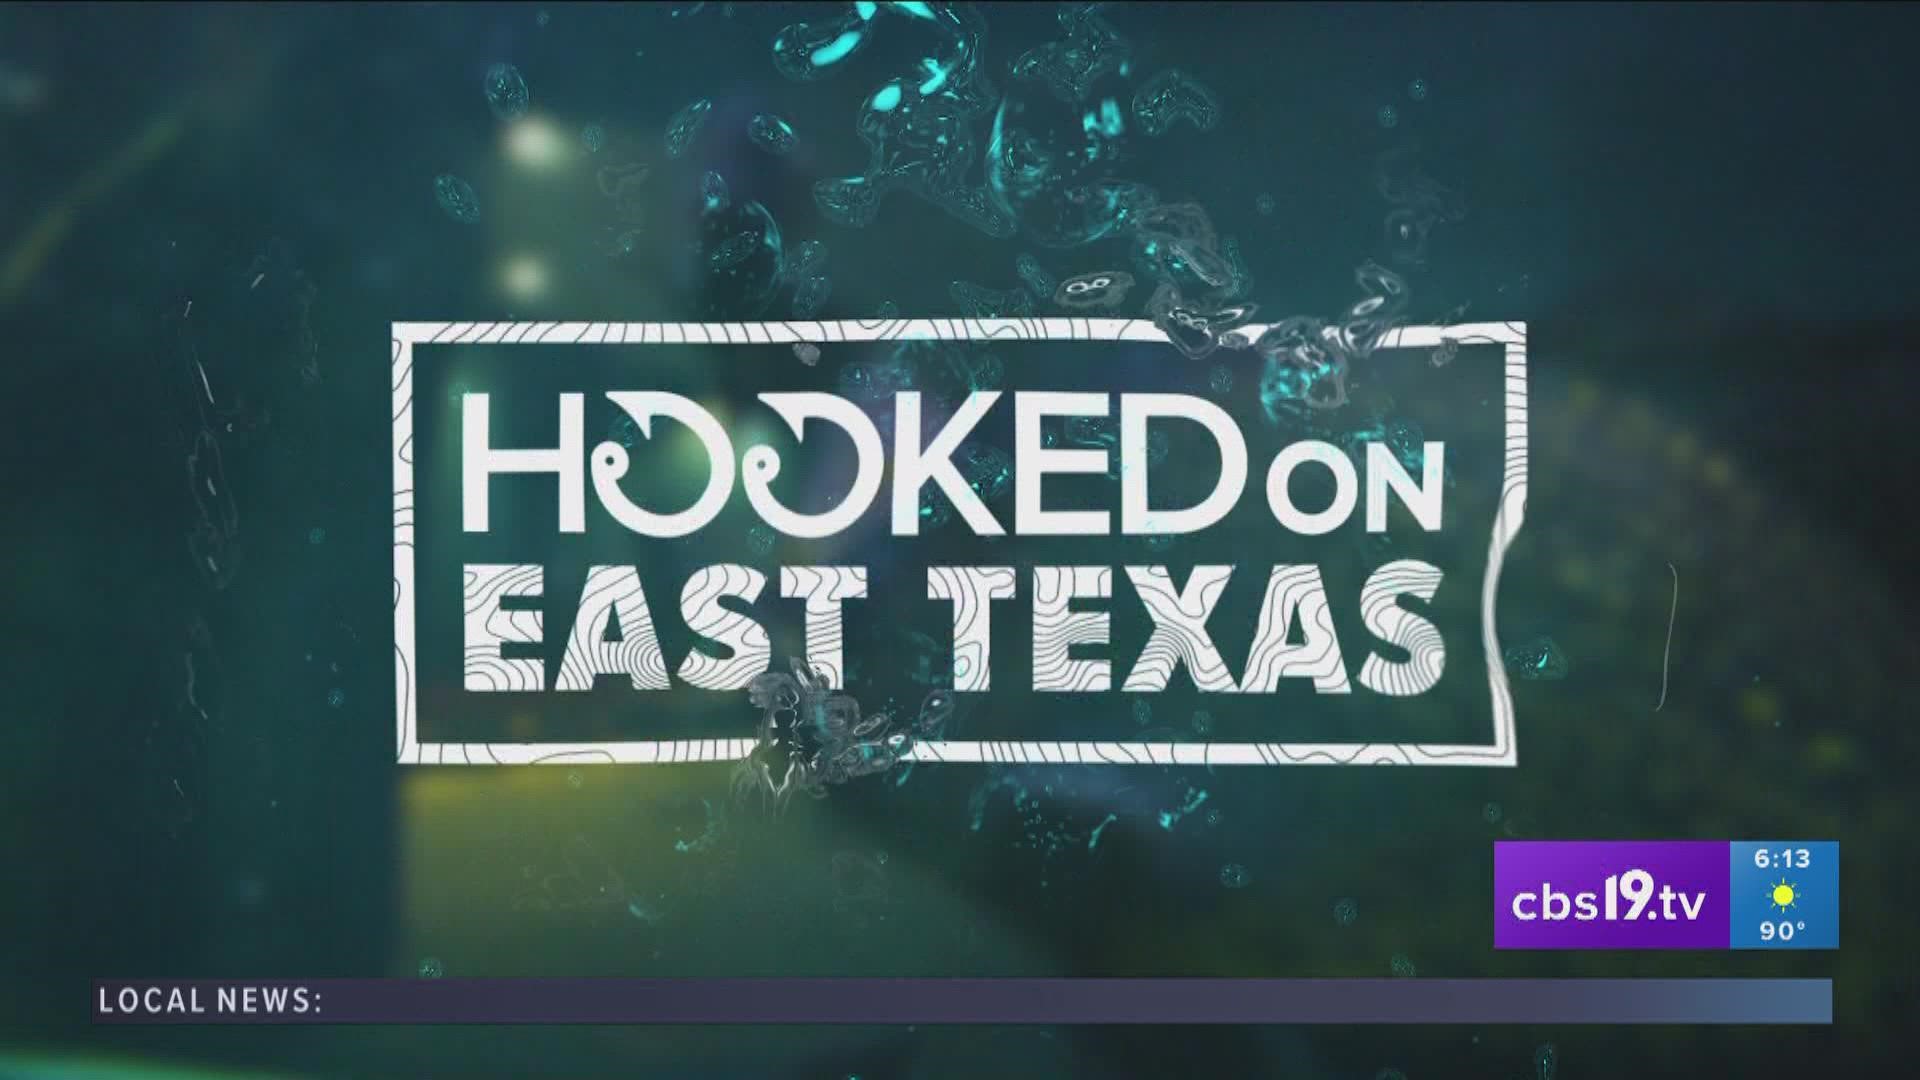 For more Hooked On East Texas stories visit, cbs19.tv